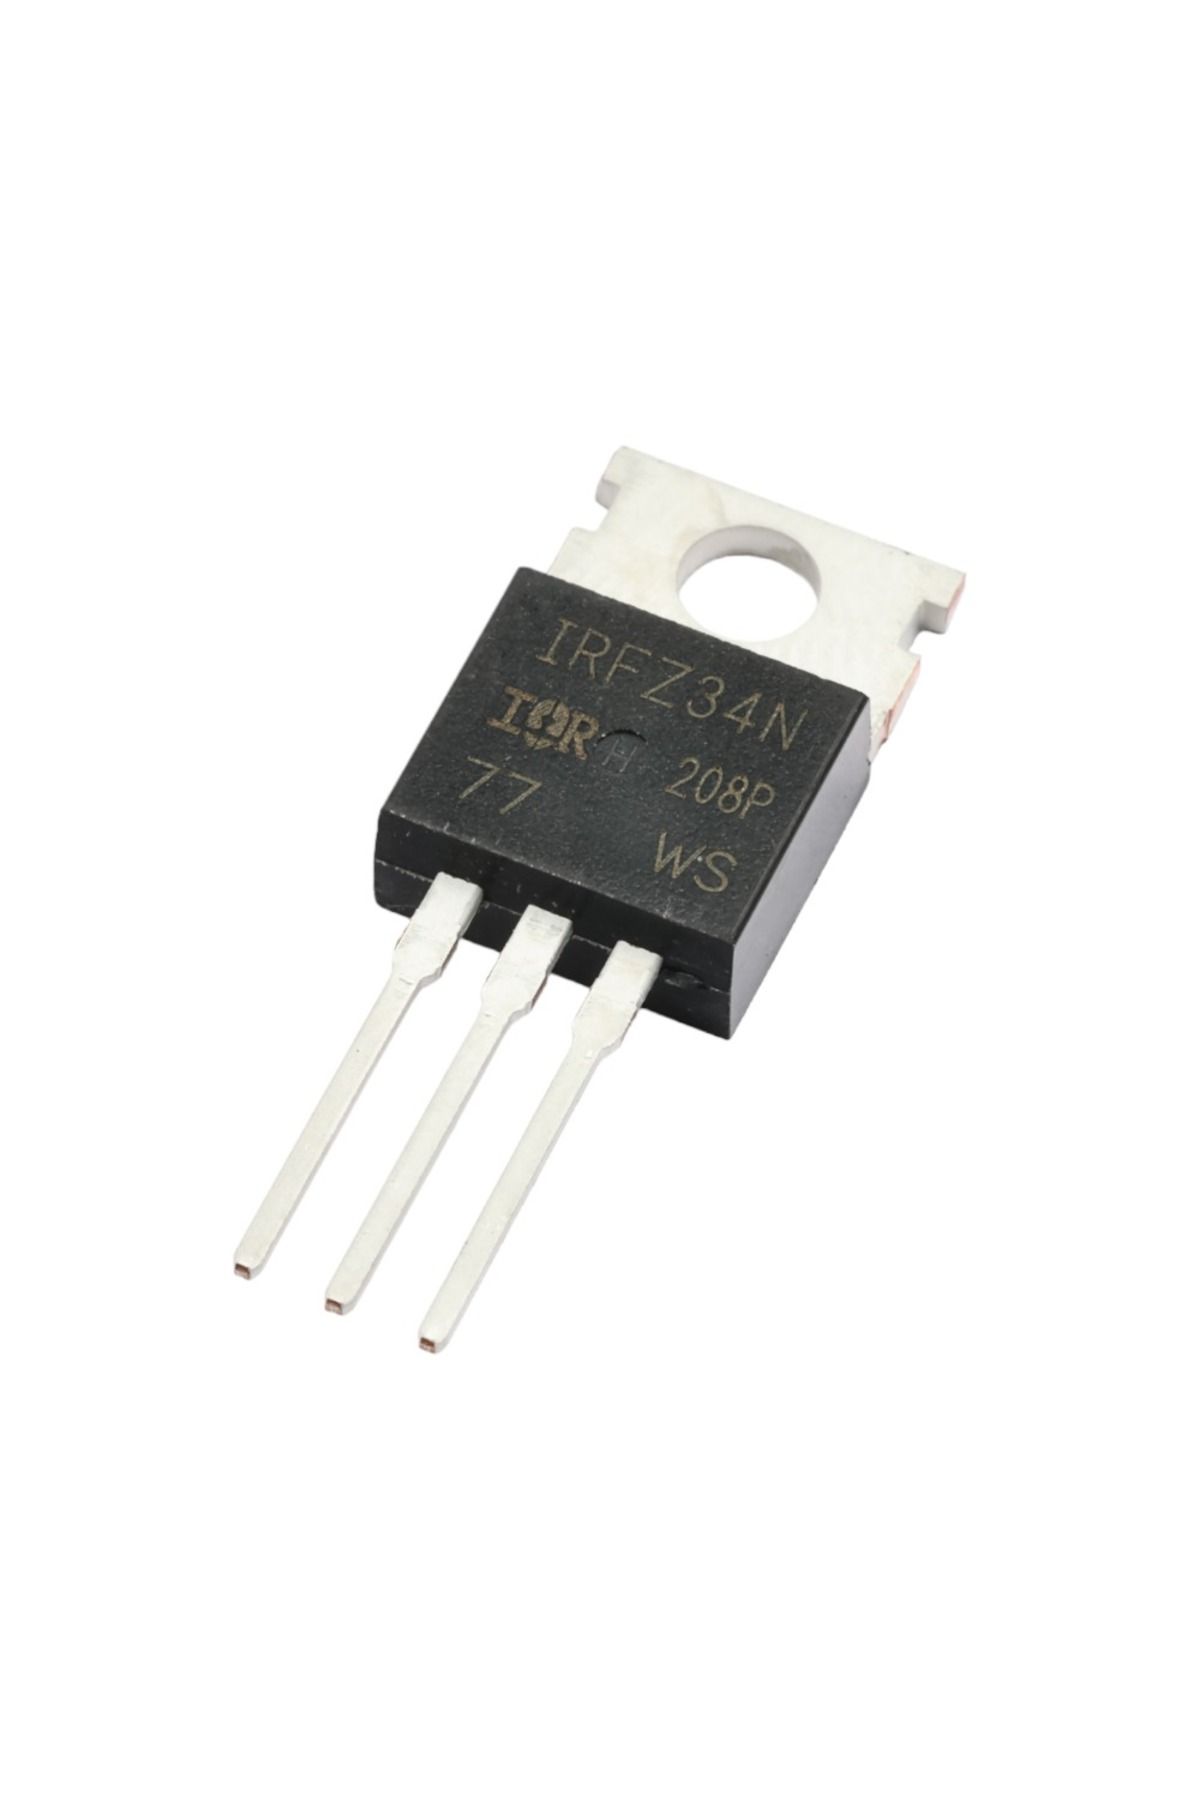 DİMA OFFİCİAL IRFZ 34 TO-220 MOSFET TRANSISTOR ShopZum